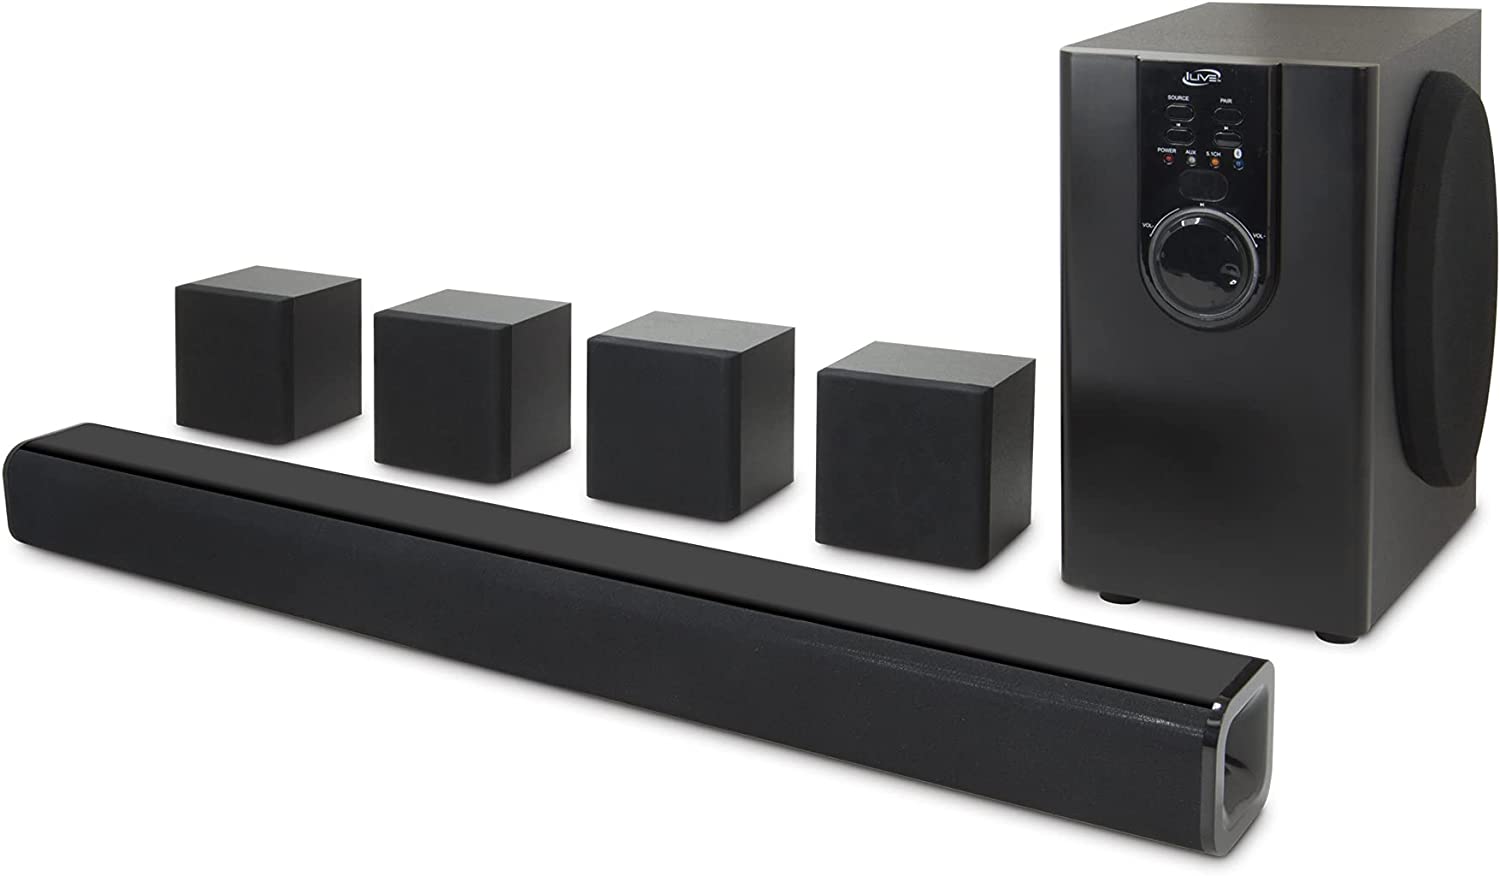 iLive 5.1 Home Theater System with Bluetooth, 6 Surround Speakers, Wall Mountable, Includes Remote, Black (IHTB159B)